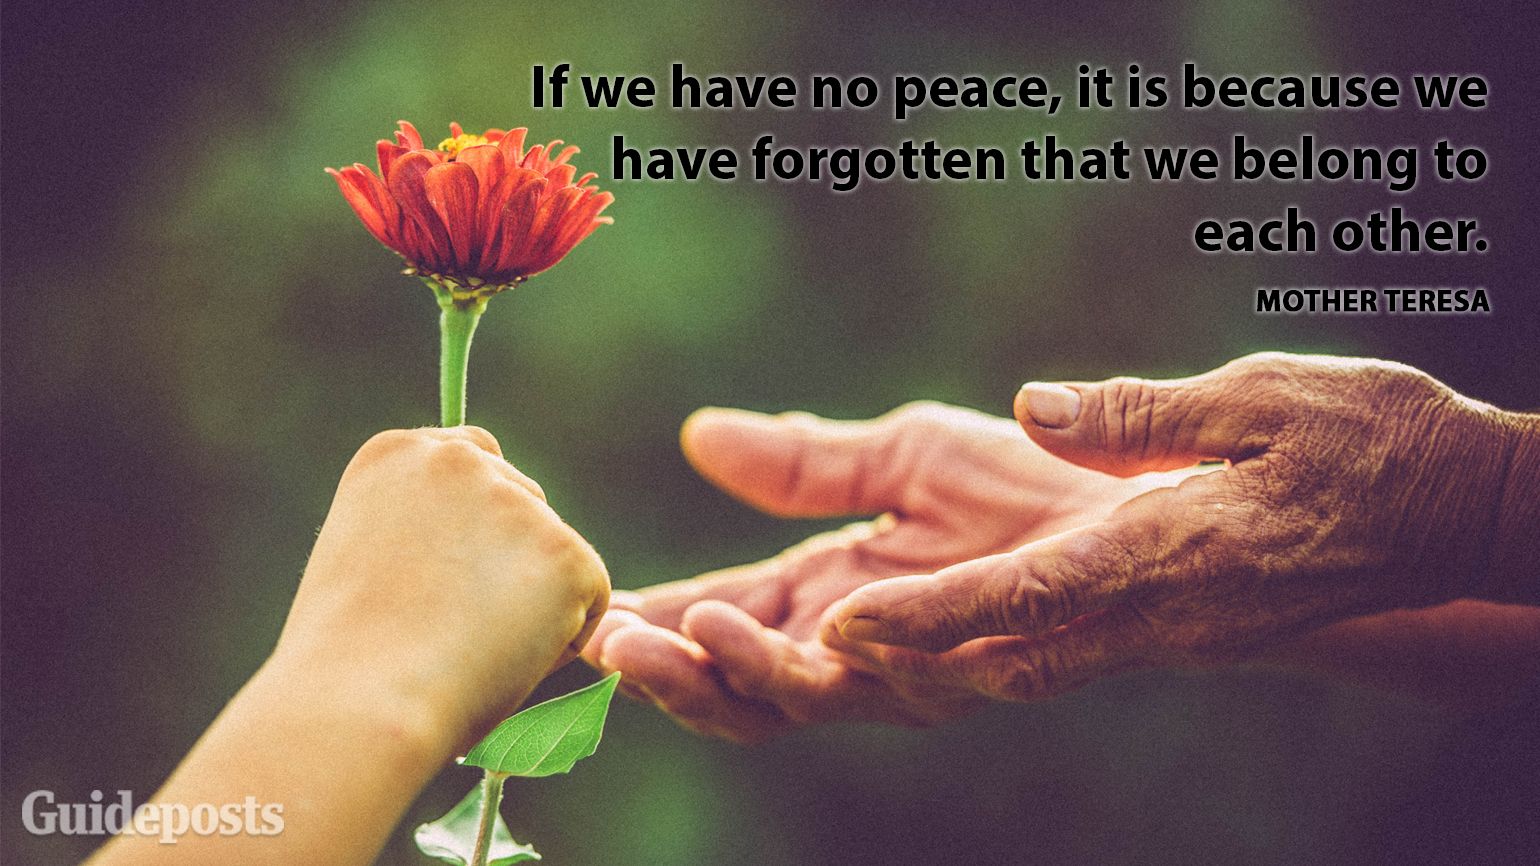 If we have no peace it is because we have forgotten that we belong to each other